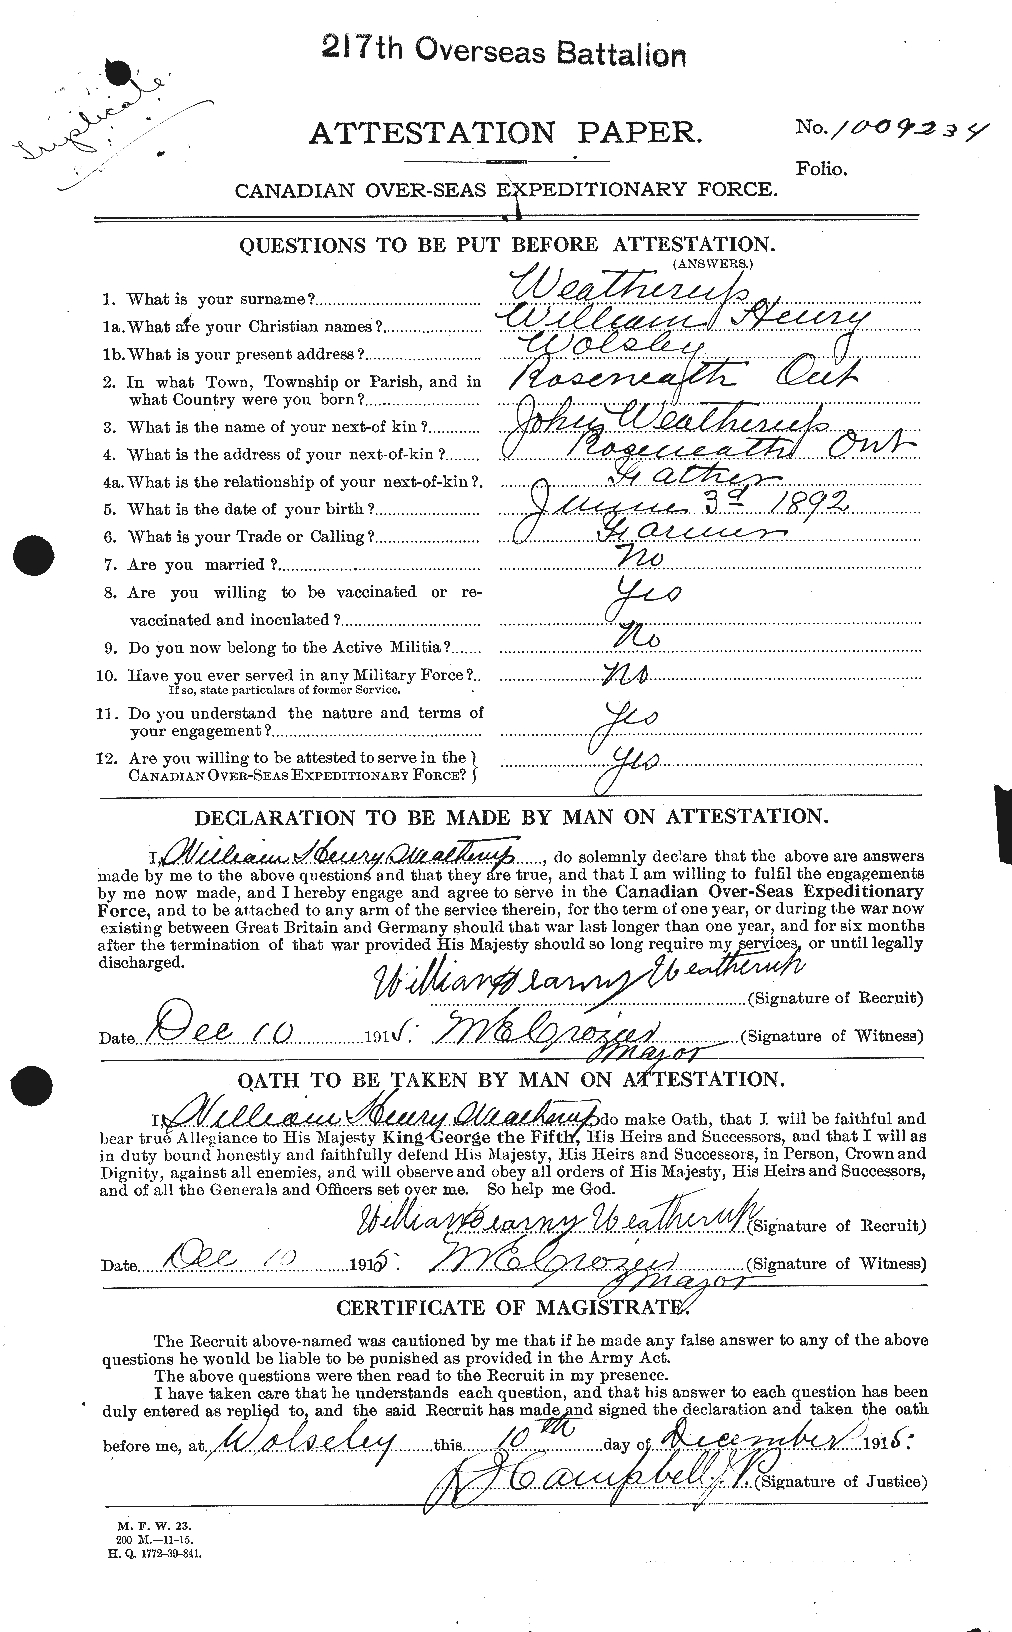 Personnel Records of the First World War - CEF 665463a